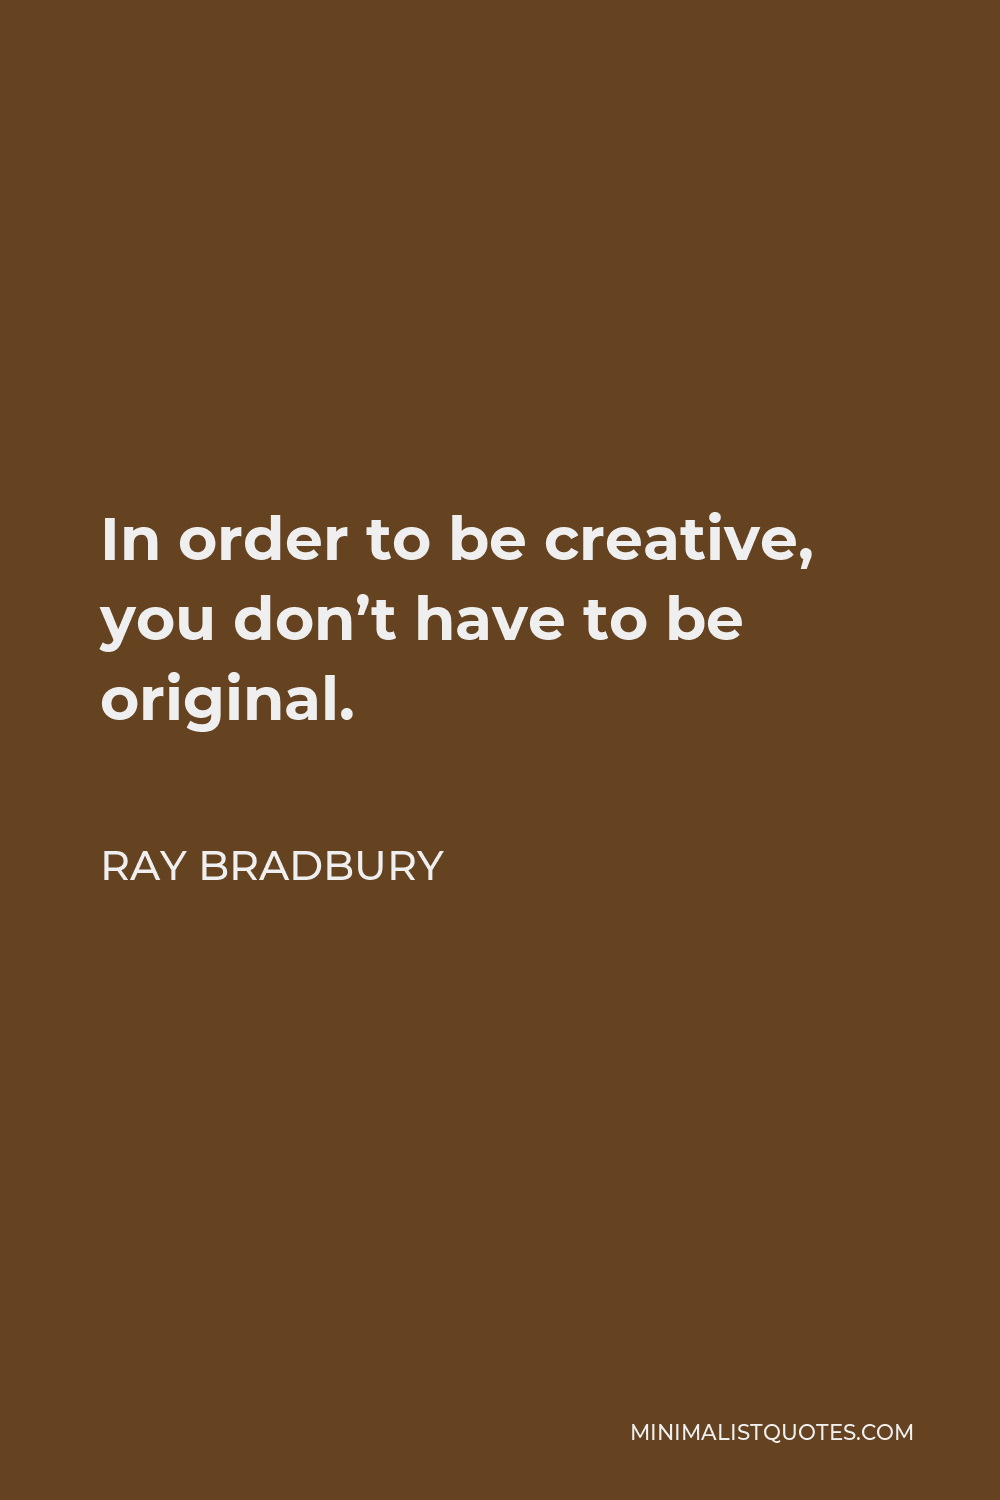 Ray Bradbury Quote - In order to be creative, you don’t have to be original.